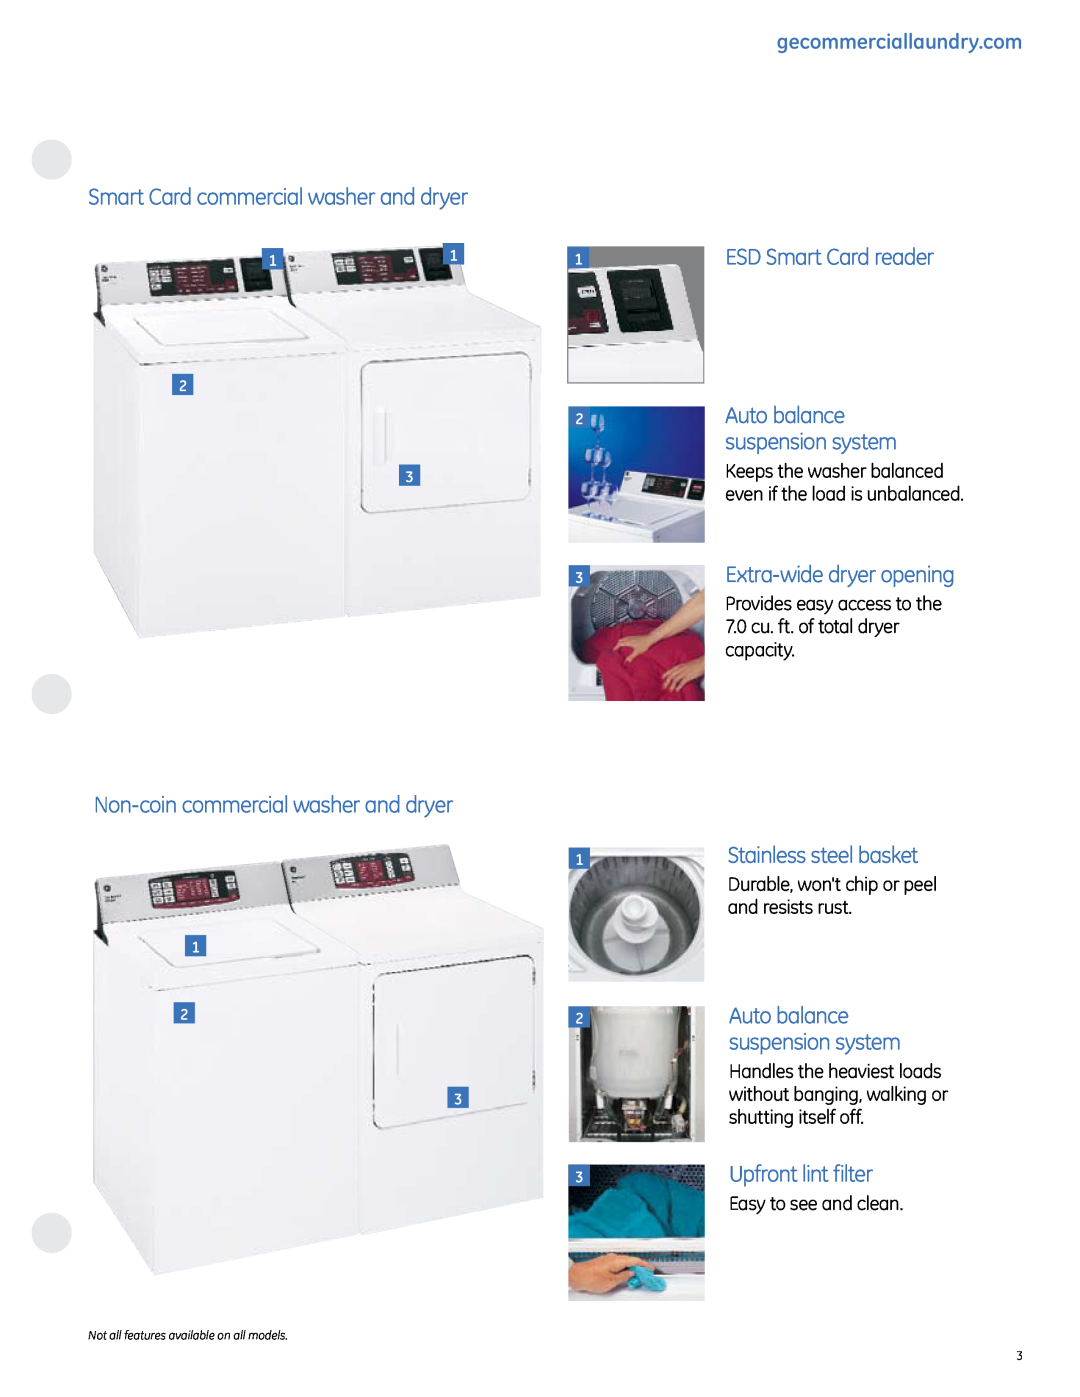 GE specifications Smart Card commercial washer and dryer, Non-coin commercial washer and dryer, ESD Smart Card reader 